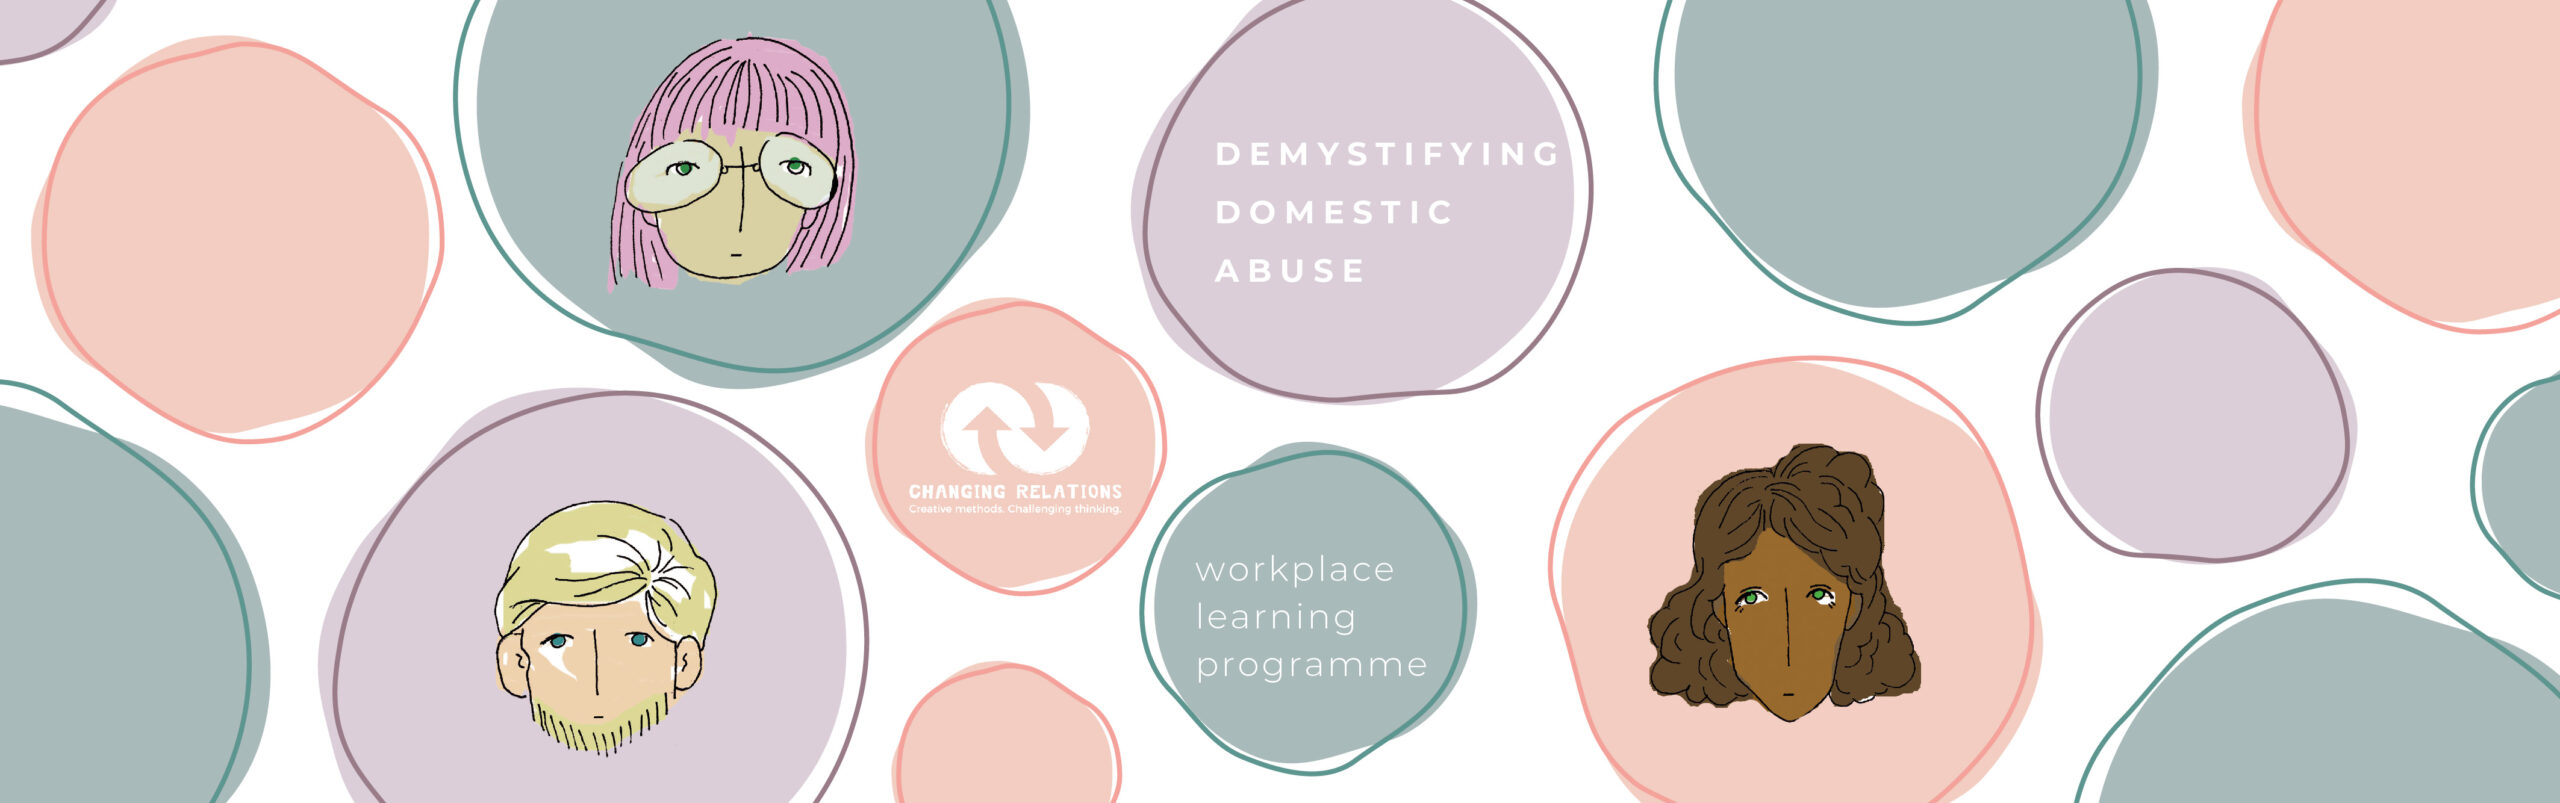 Changing Relations Demystifying Domestic Abuse training day